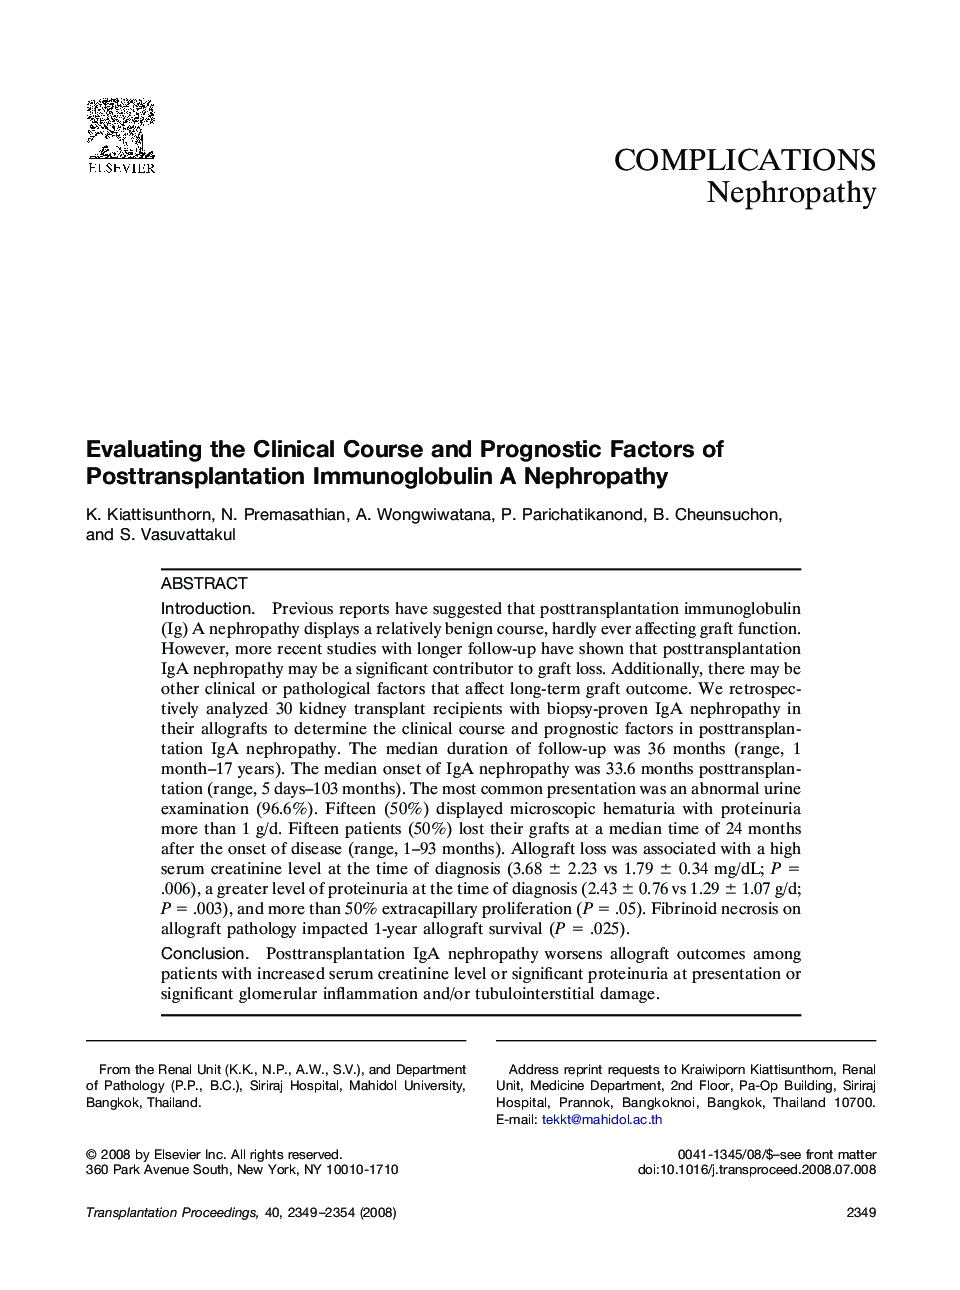 Evaluating the Clinical Course and Prognostic Factors of Posttransplantation Immunoglobulin A Nephropathy